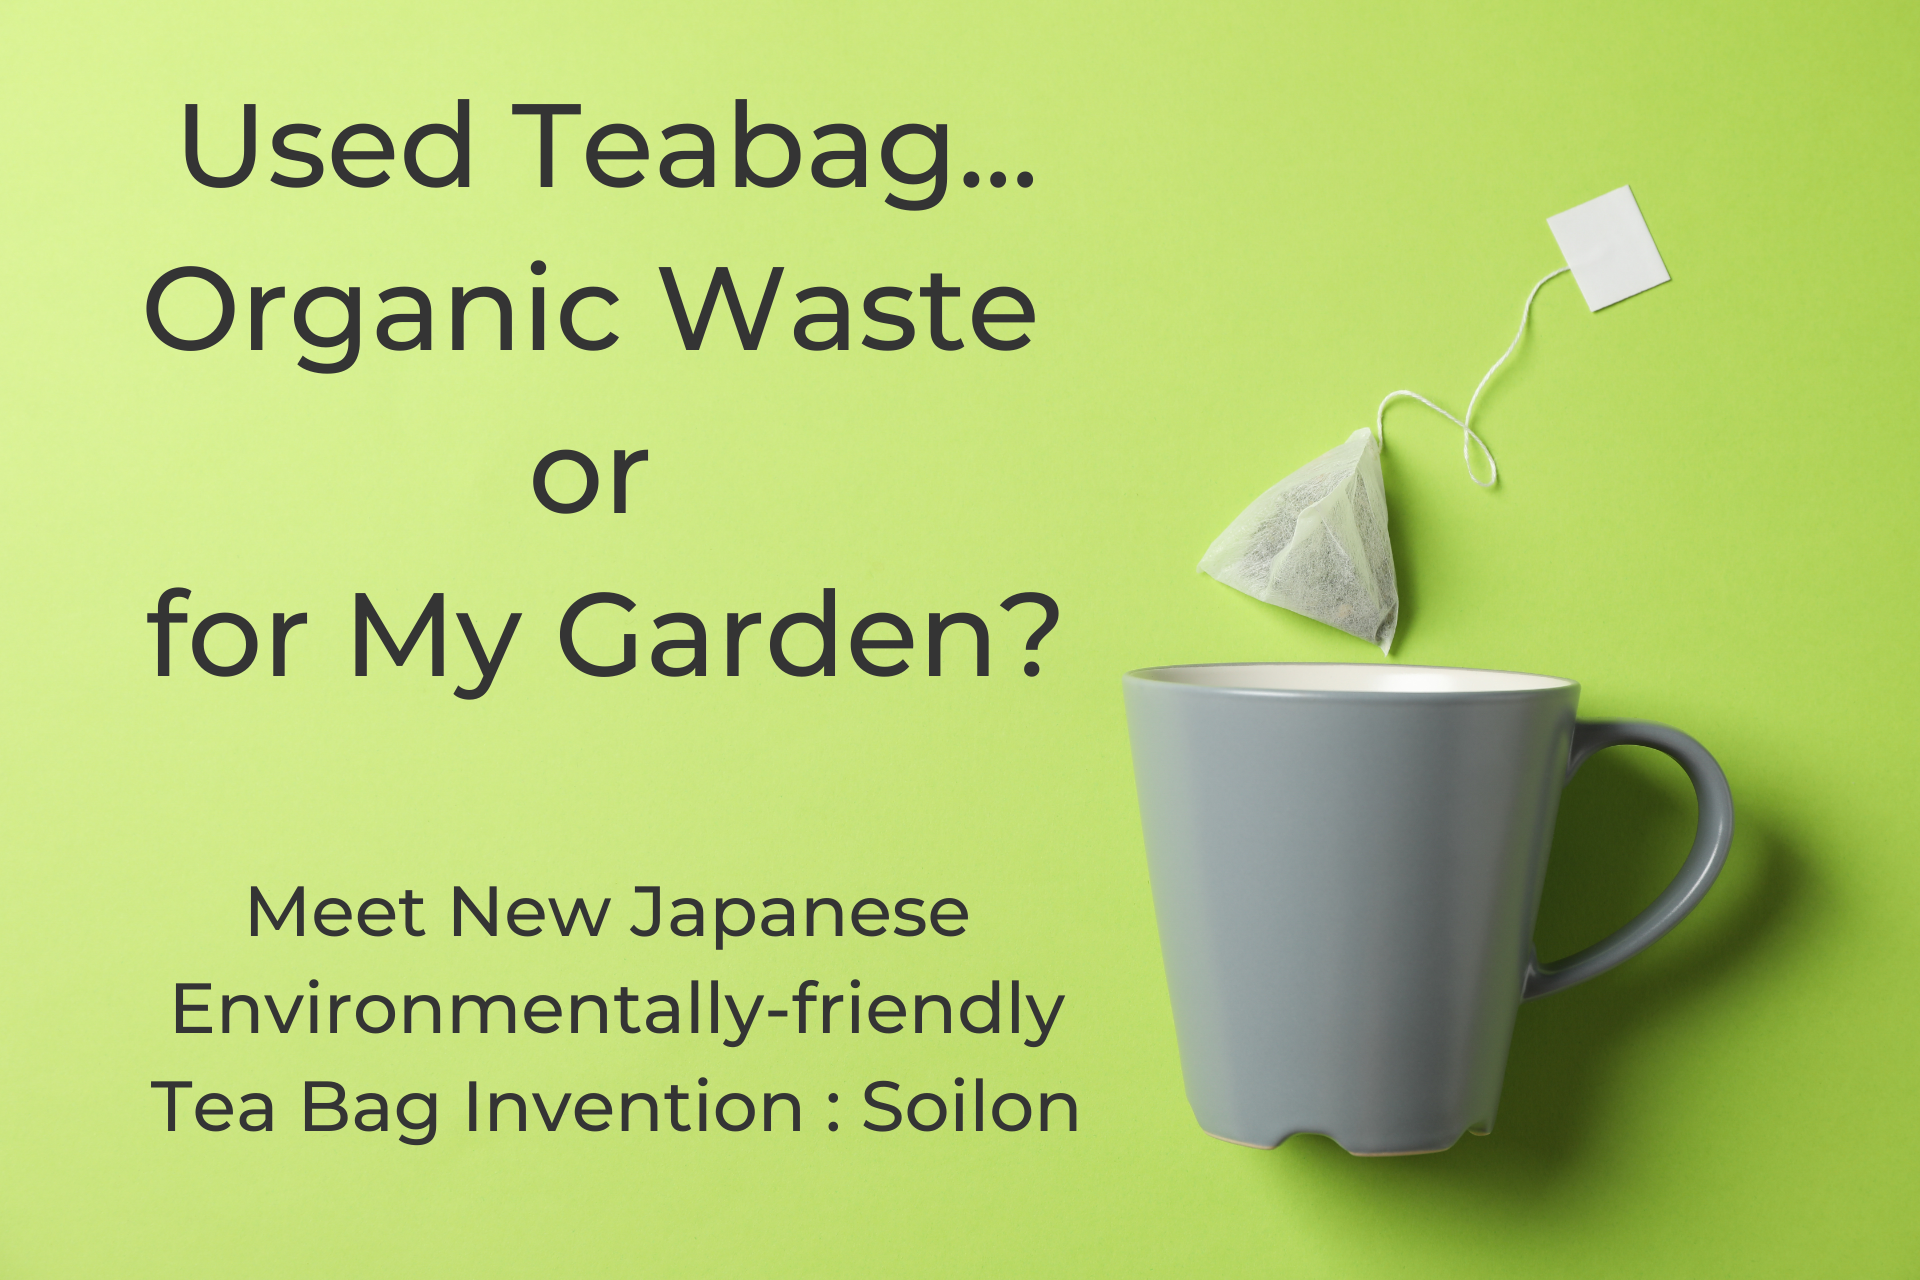 Used Teabag - Organic Waste or Perfect Compost For My Garden?